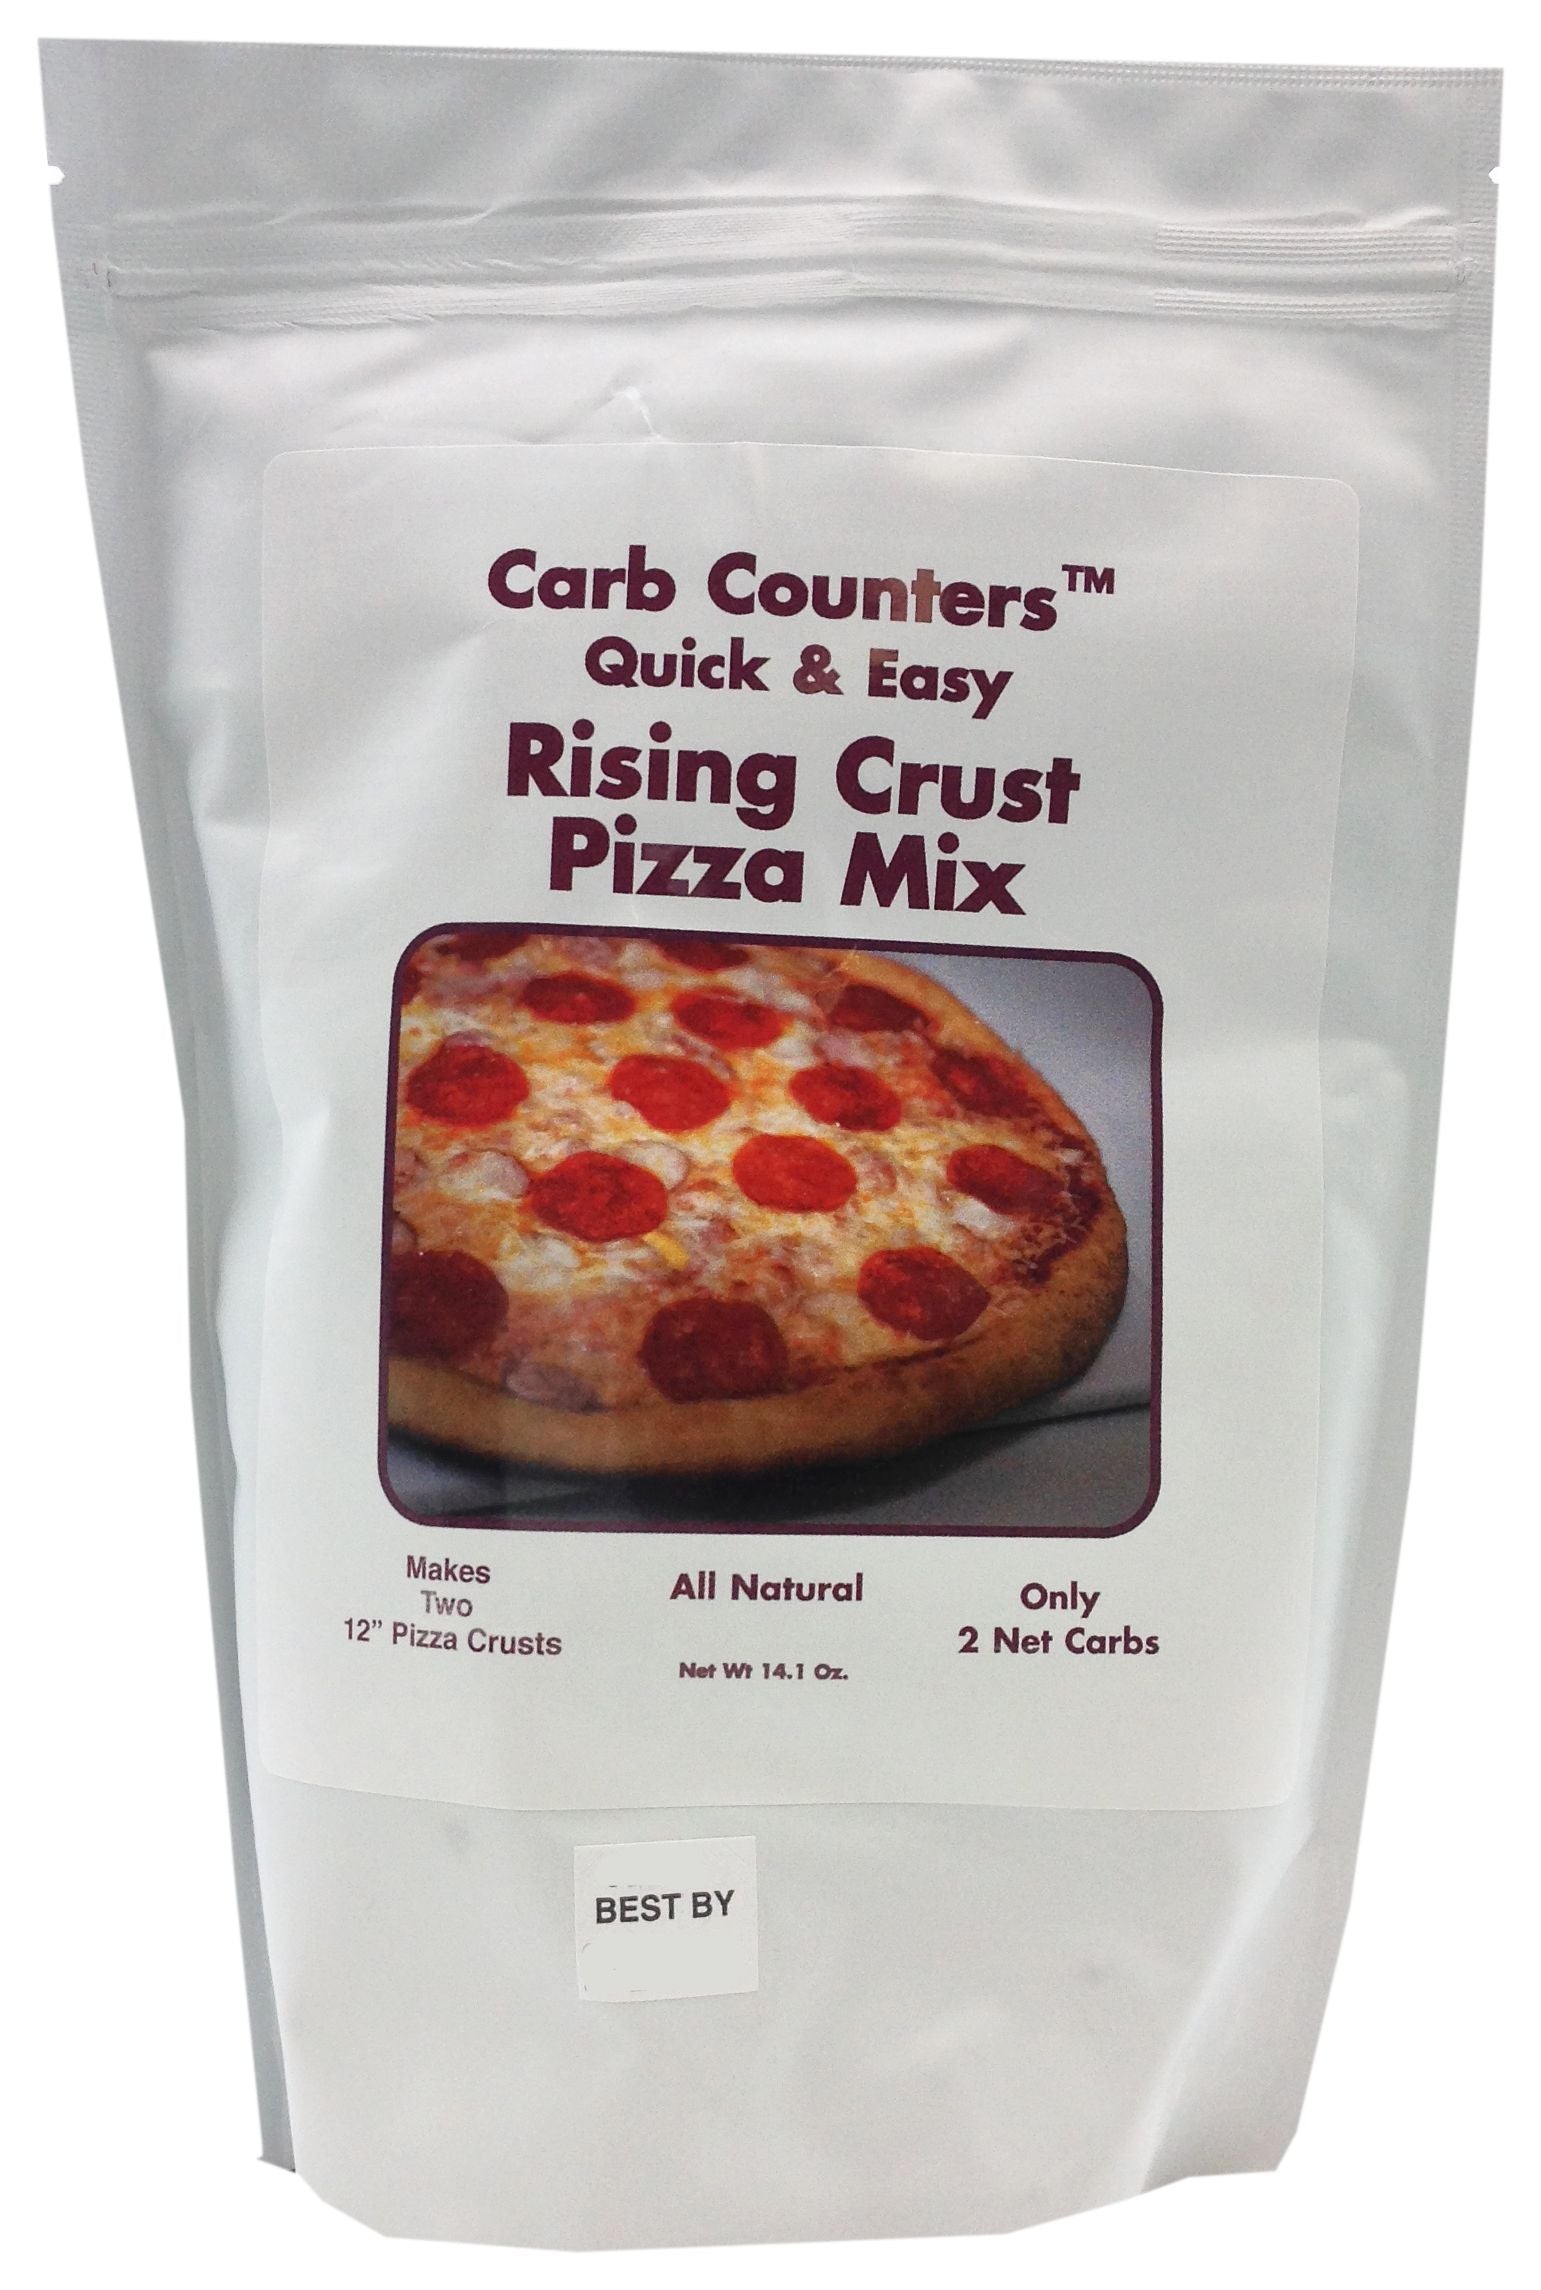 Dixie USA Carb Counters Quick & Easy Rising Crust Pizza Mix 14.1 oz. - High-quality Baking Products by Dixie USA at 